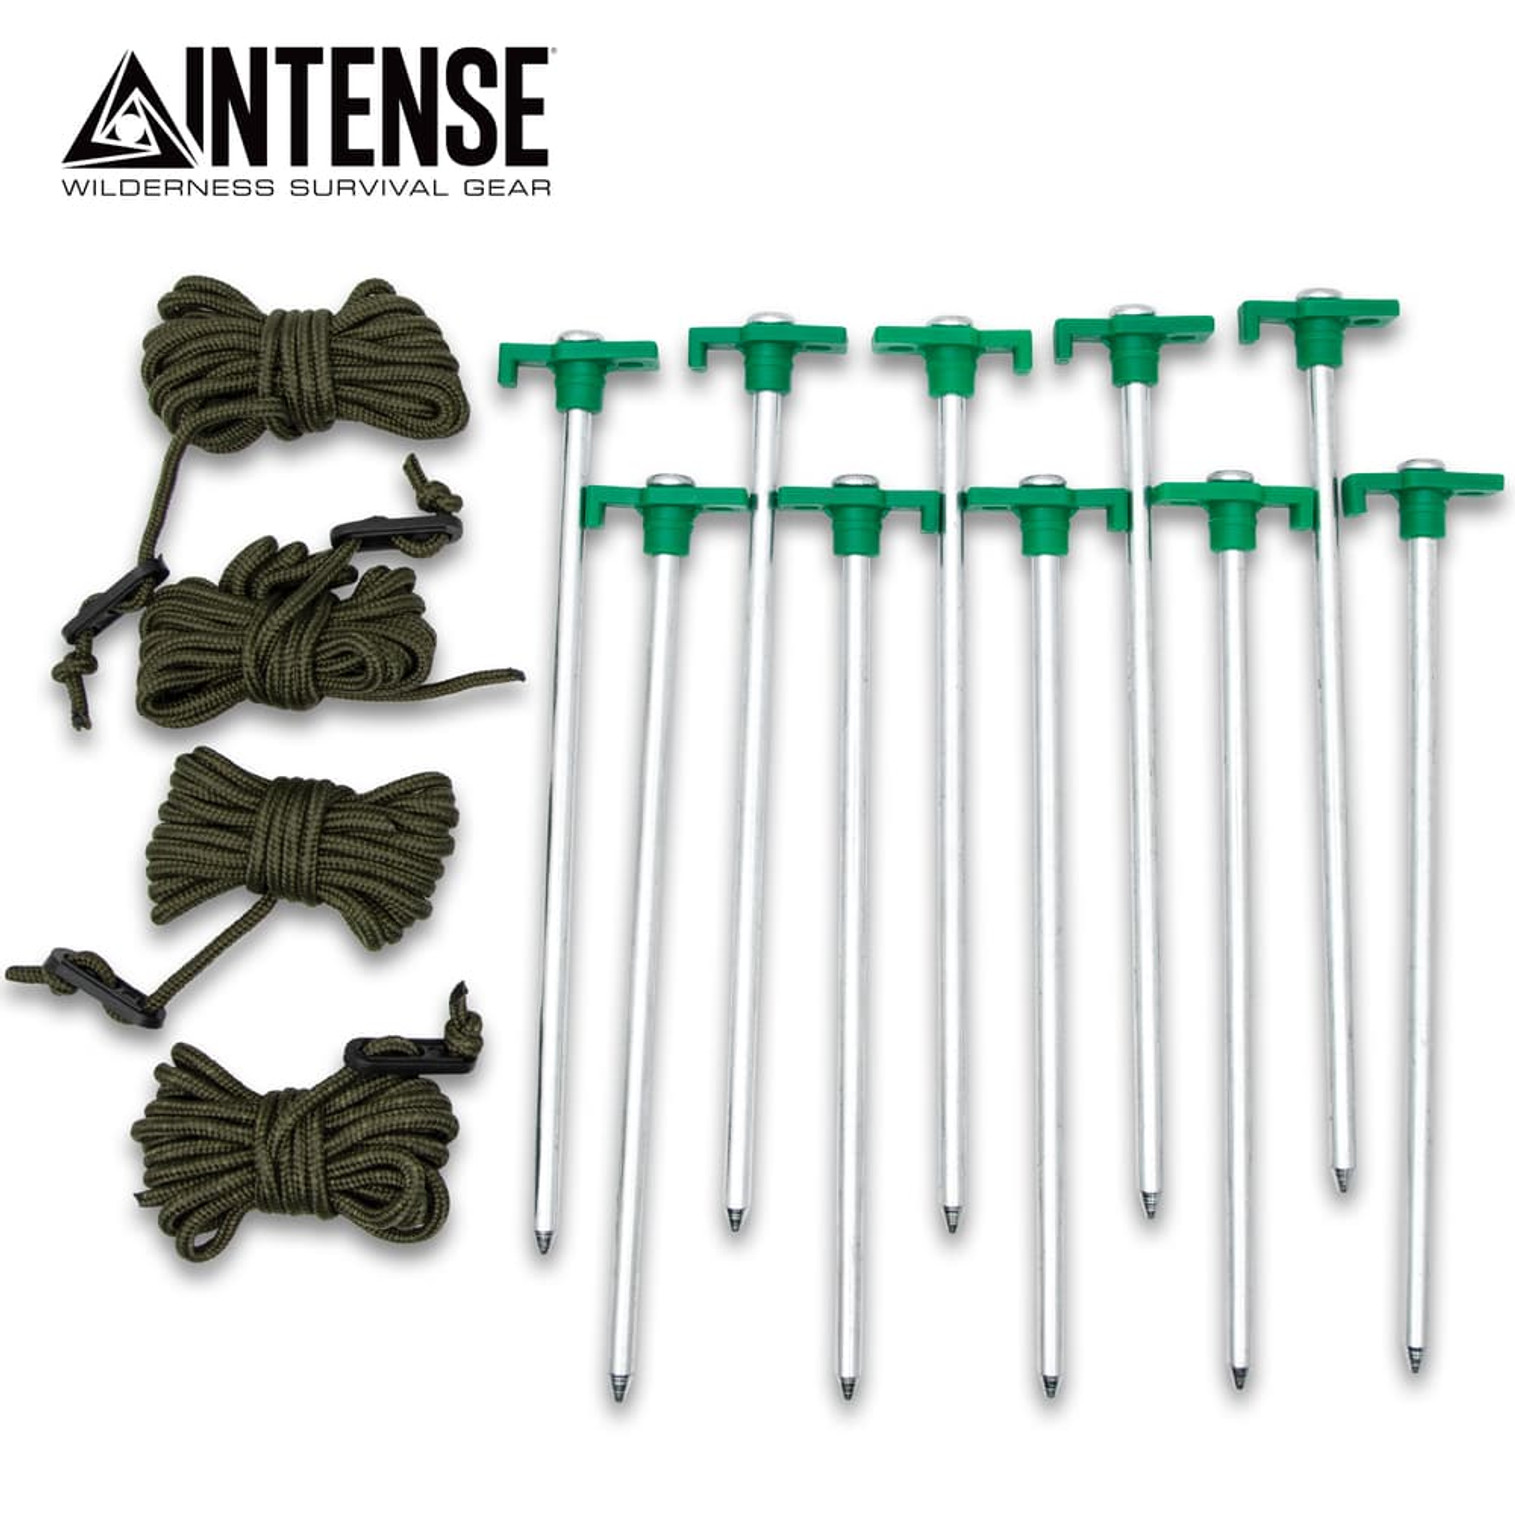 Intense Tent Stakes - 10-Pack